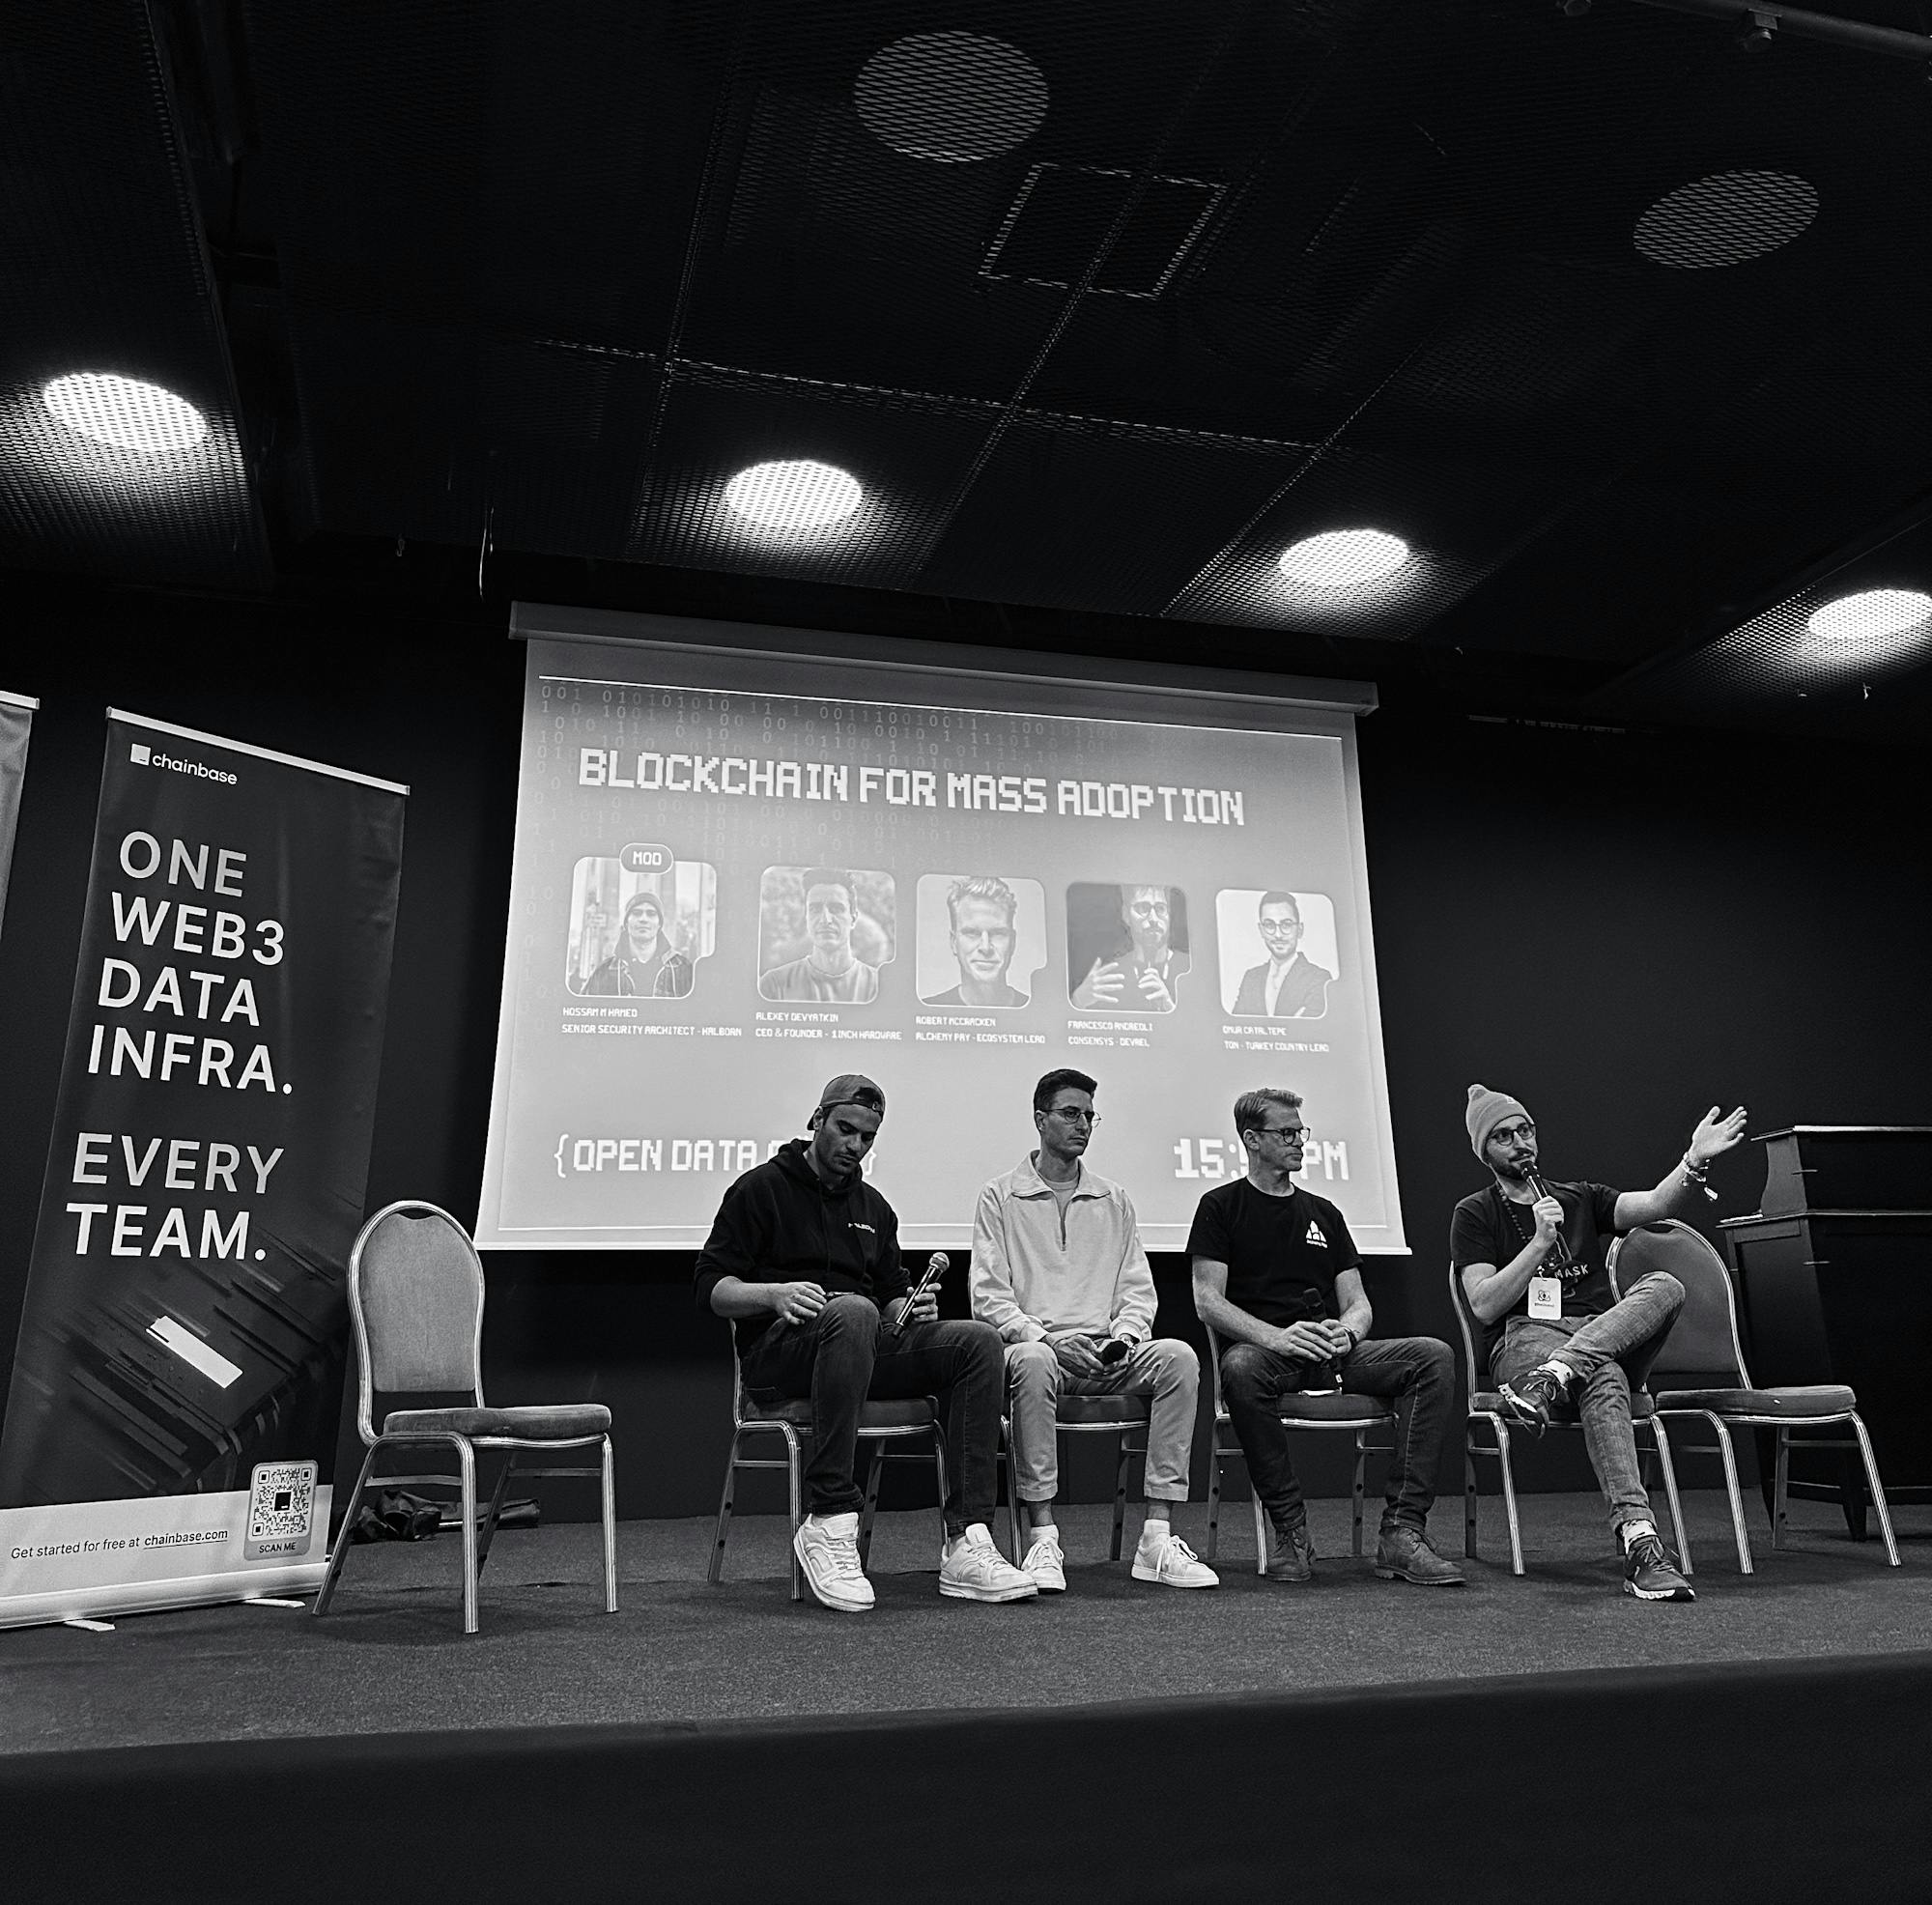 Francesco speaks on a panel about mass adoption, one of his many talks throughout the Istanbul events and activations.